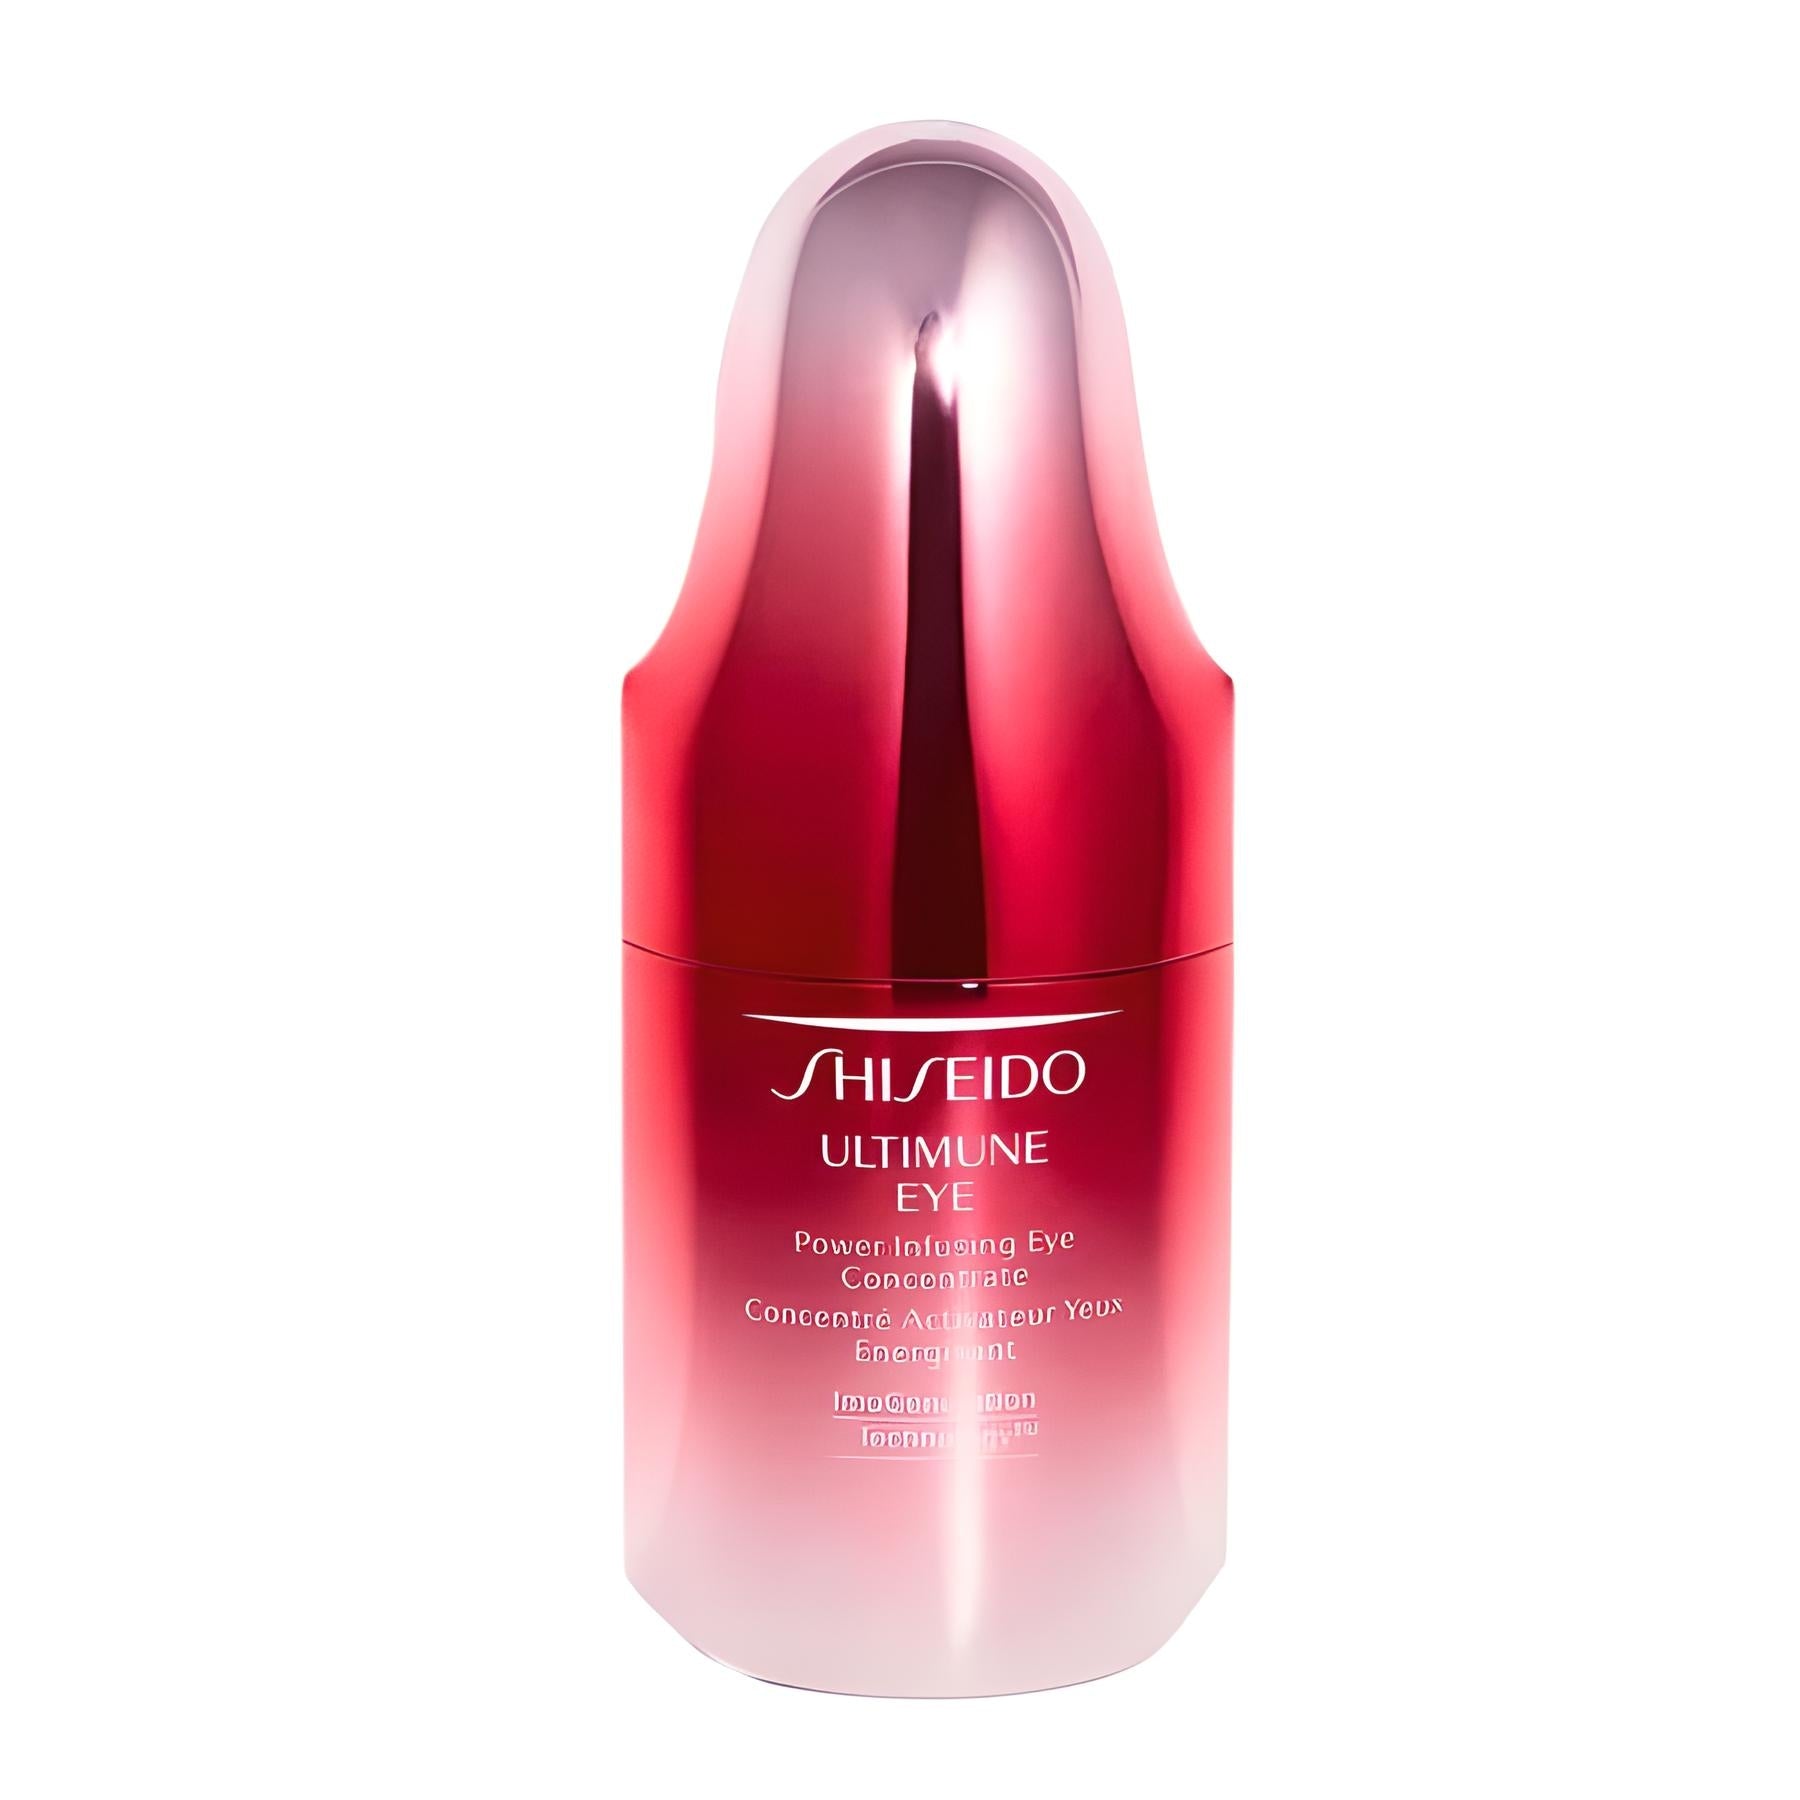 ULTIMUNE power infusing eye concentrate Gesichtspflege SHISEIDO   